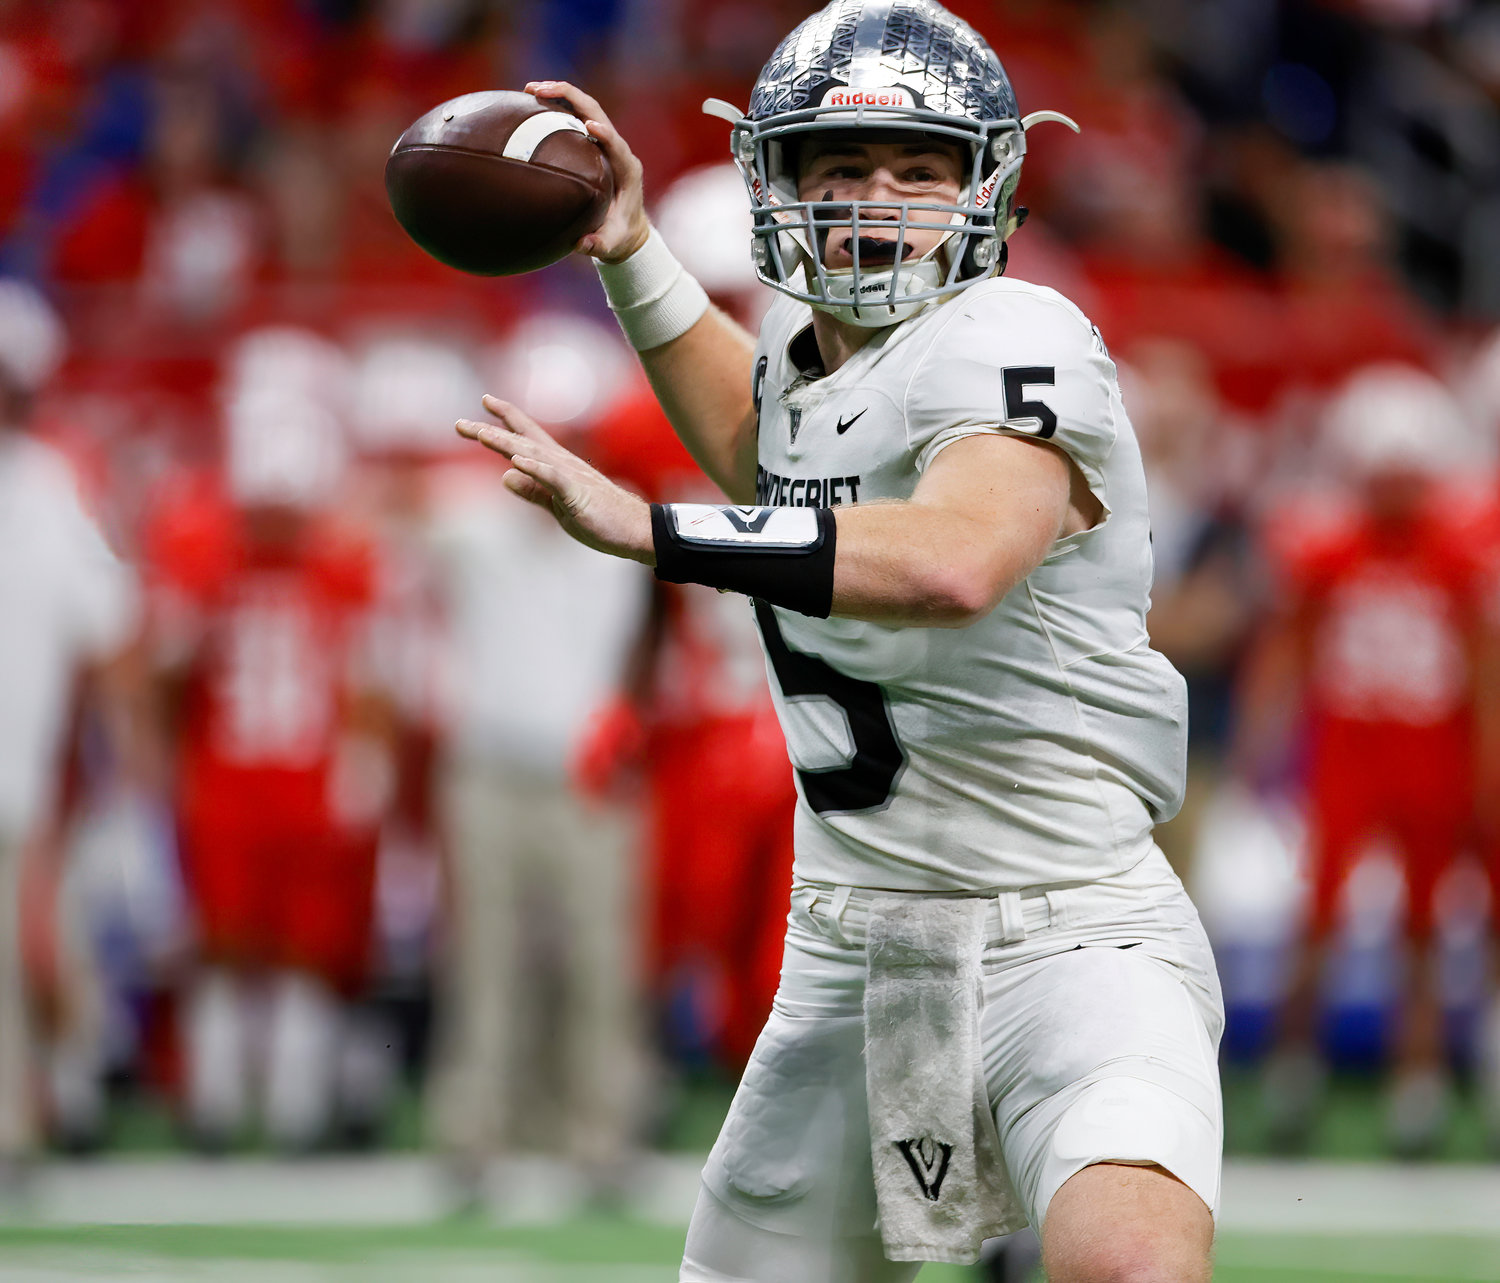 Vandegrift Vipers senior quarterback Brayden Buchanan (5) passes the ball during the Class 6A-DII state semifinal football game between Katy and Vandegrift on Dec. 10, 2022 in San Antonio.